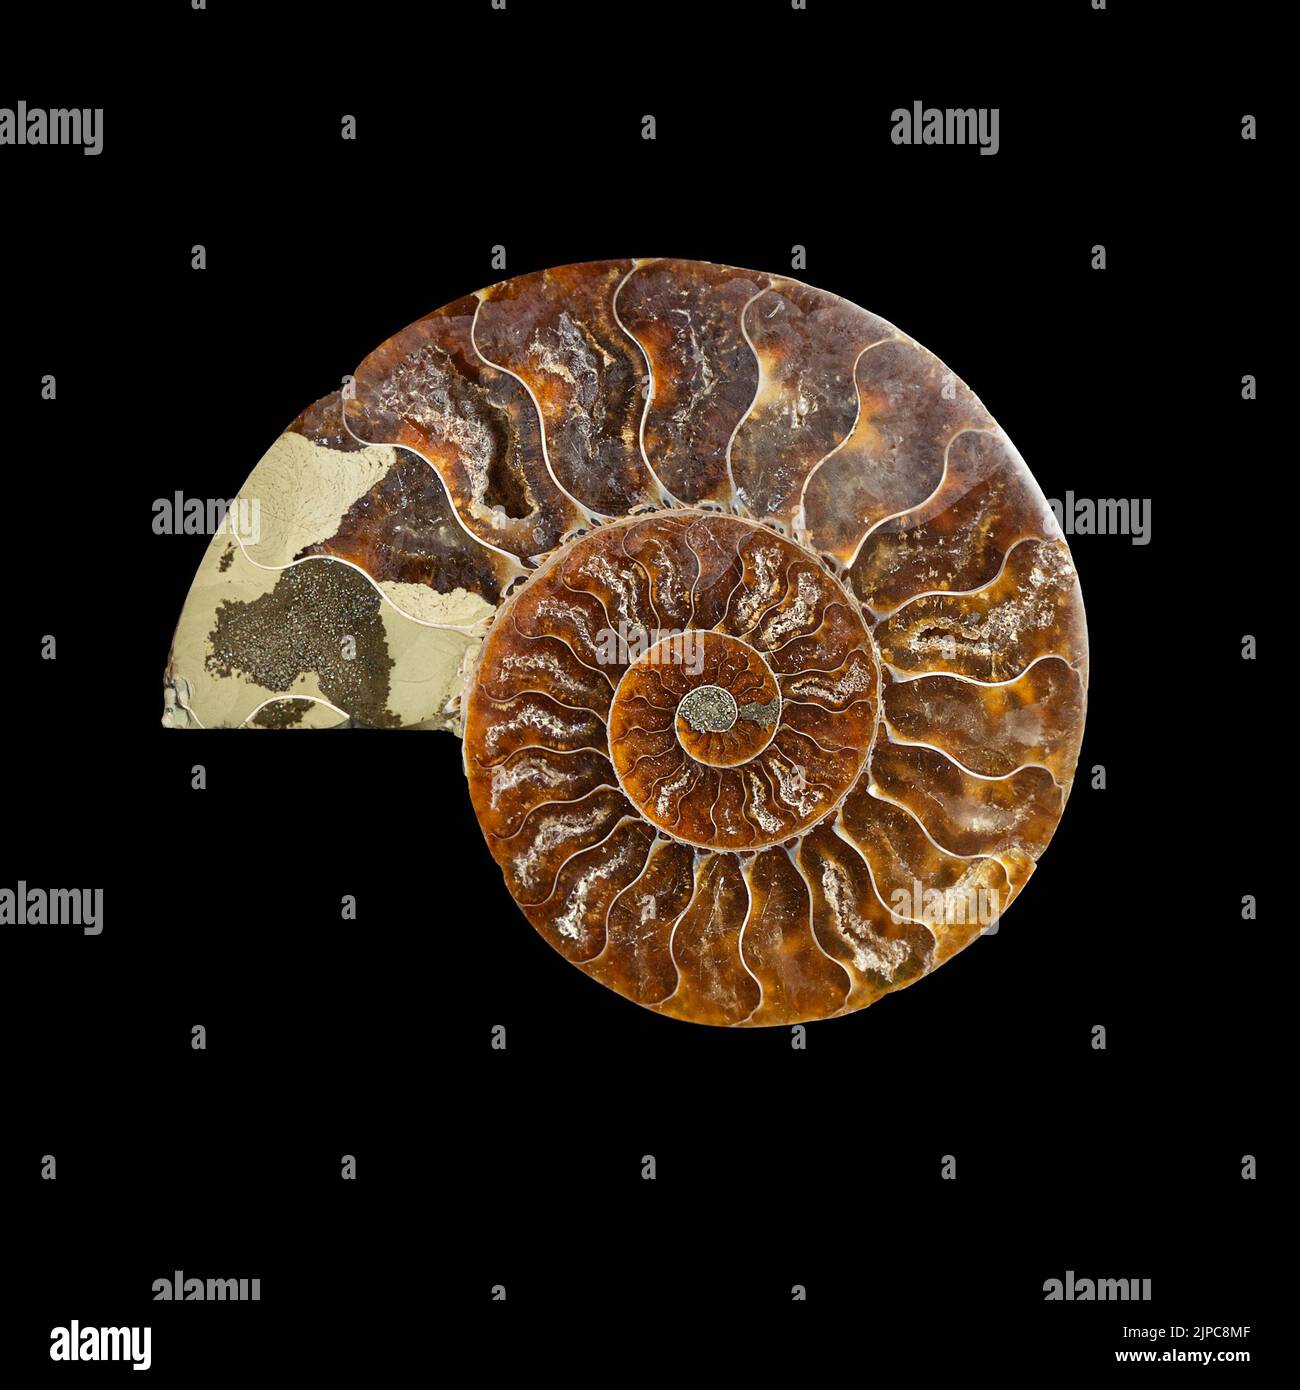 Ammonite fossil shell isolated on black background. Stock Photo